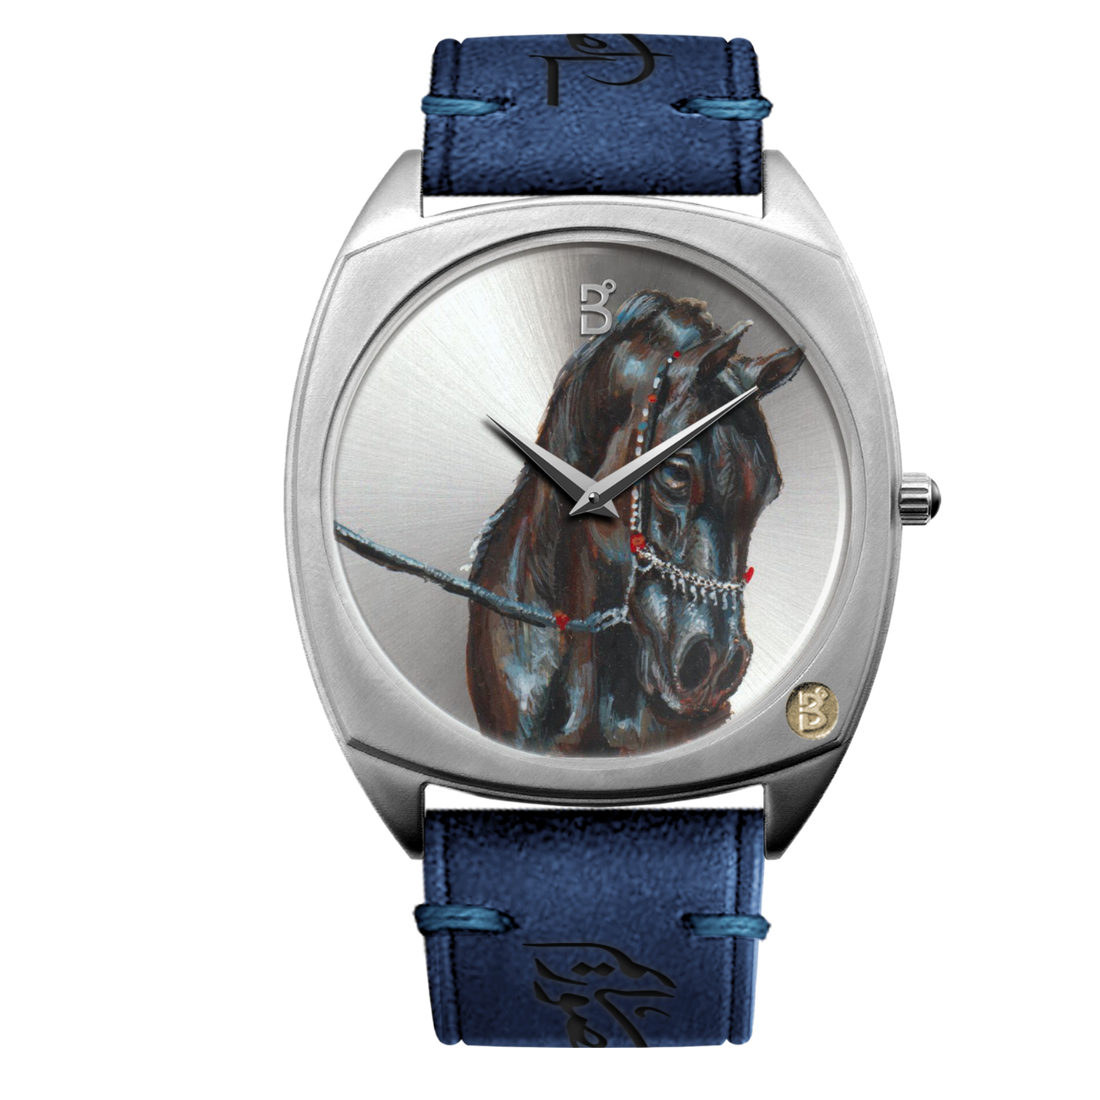  B360-Watches-We have created over 70 hand-painted watches, one for each horse. Each watch comes with a signed certificate by our artists and is marked as 1 out of 1. Check out our Arabian Horses collections.  